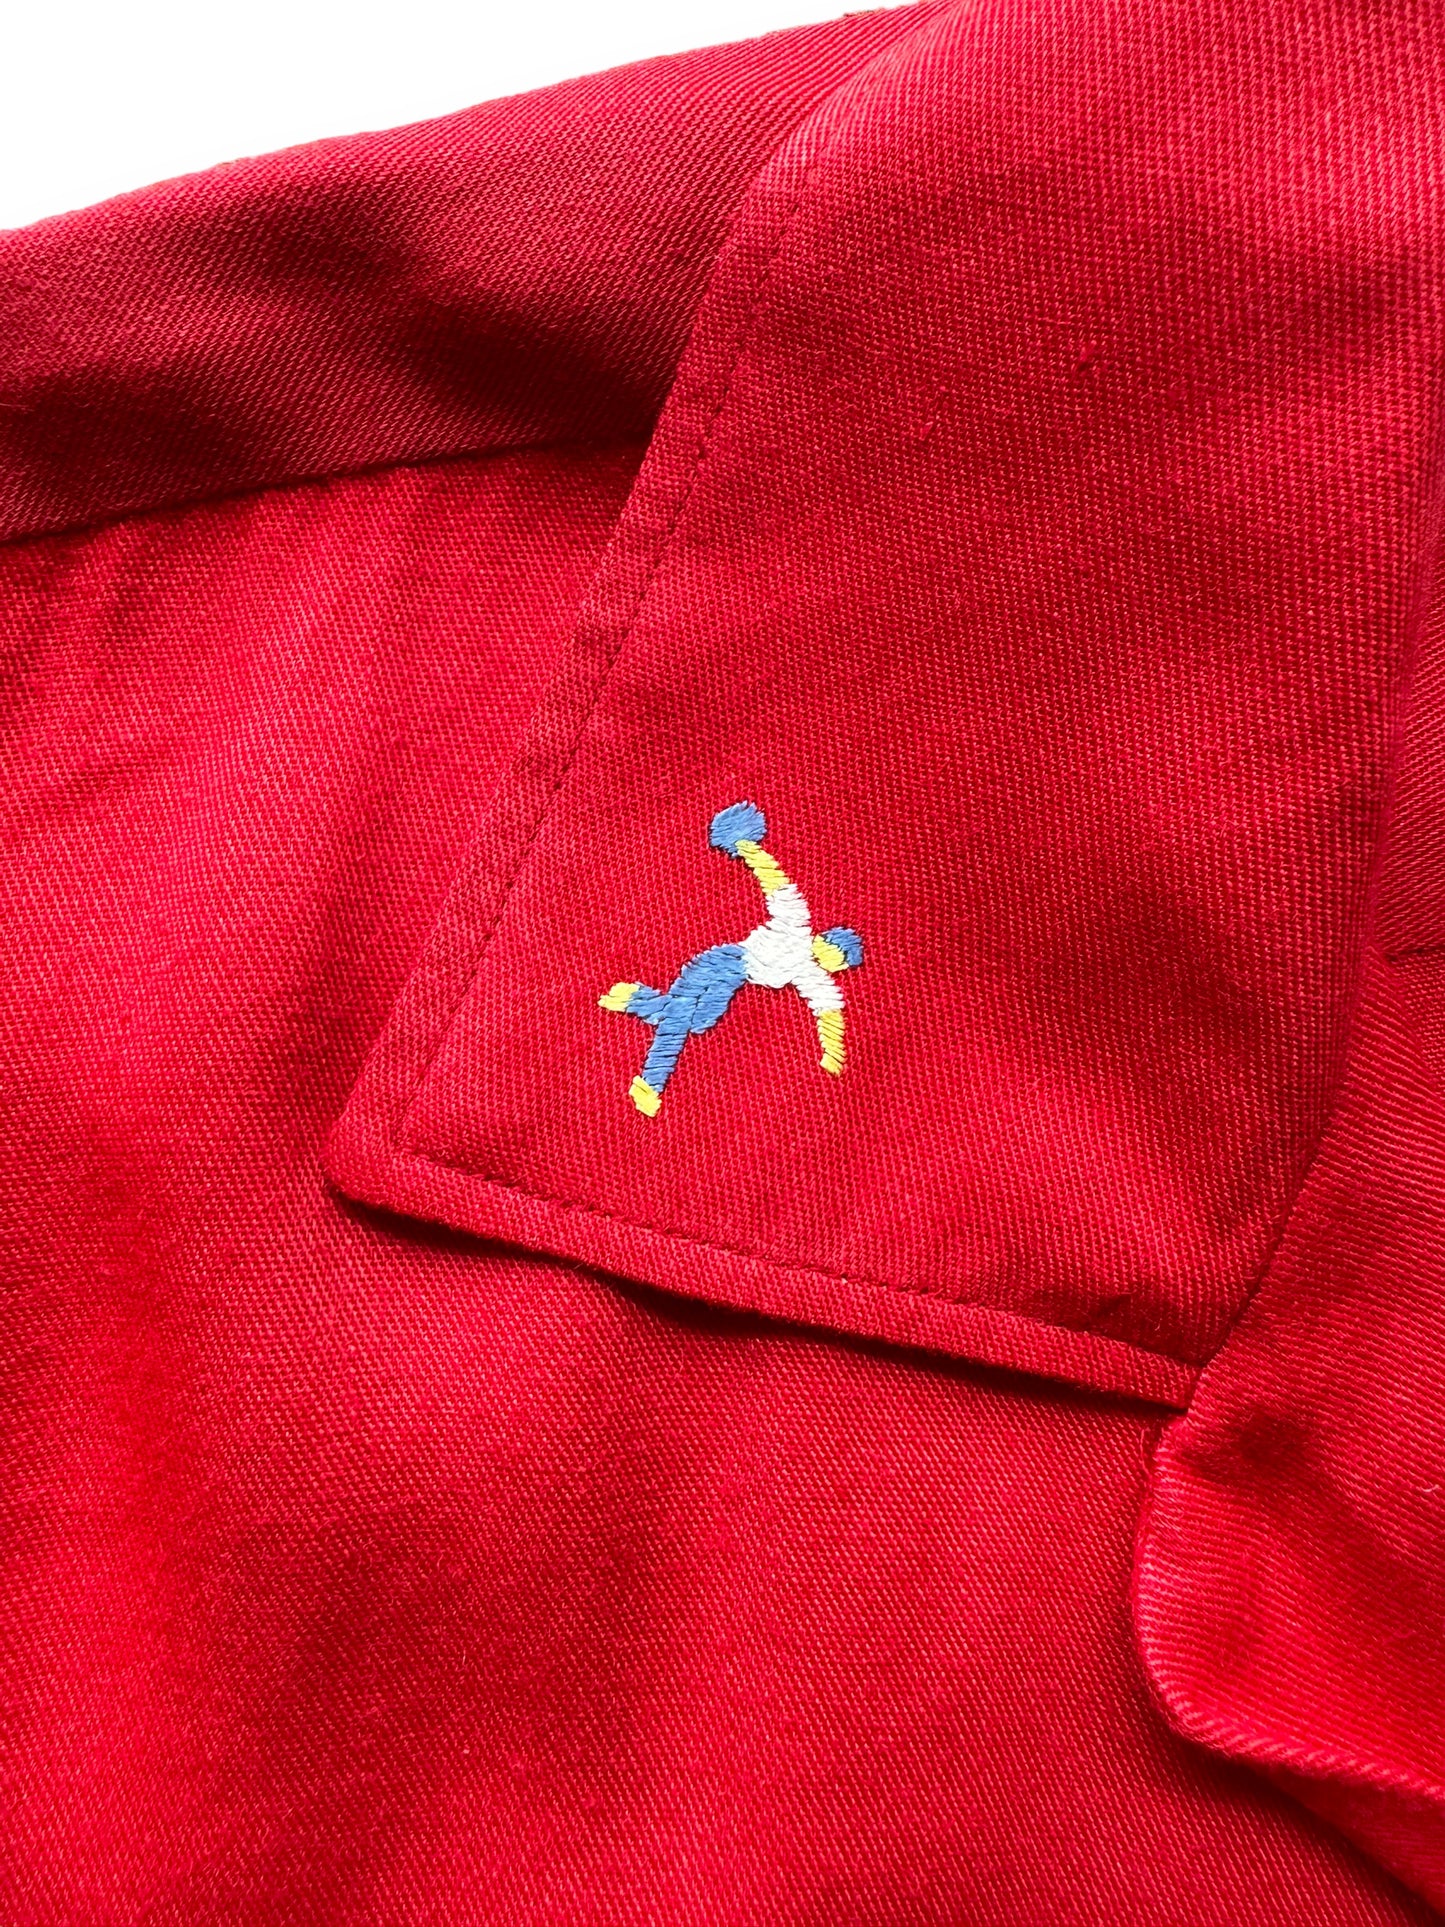 Collar embroidery on Vintage "Shearer's Service Station" Chainstitched Bowling Shirt SZ M | Vintage Bowling Shirt Seattle | Barn Owl Vintage Seattle